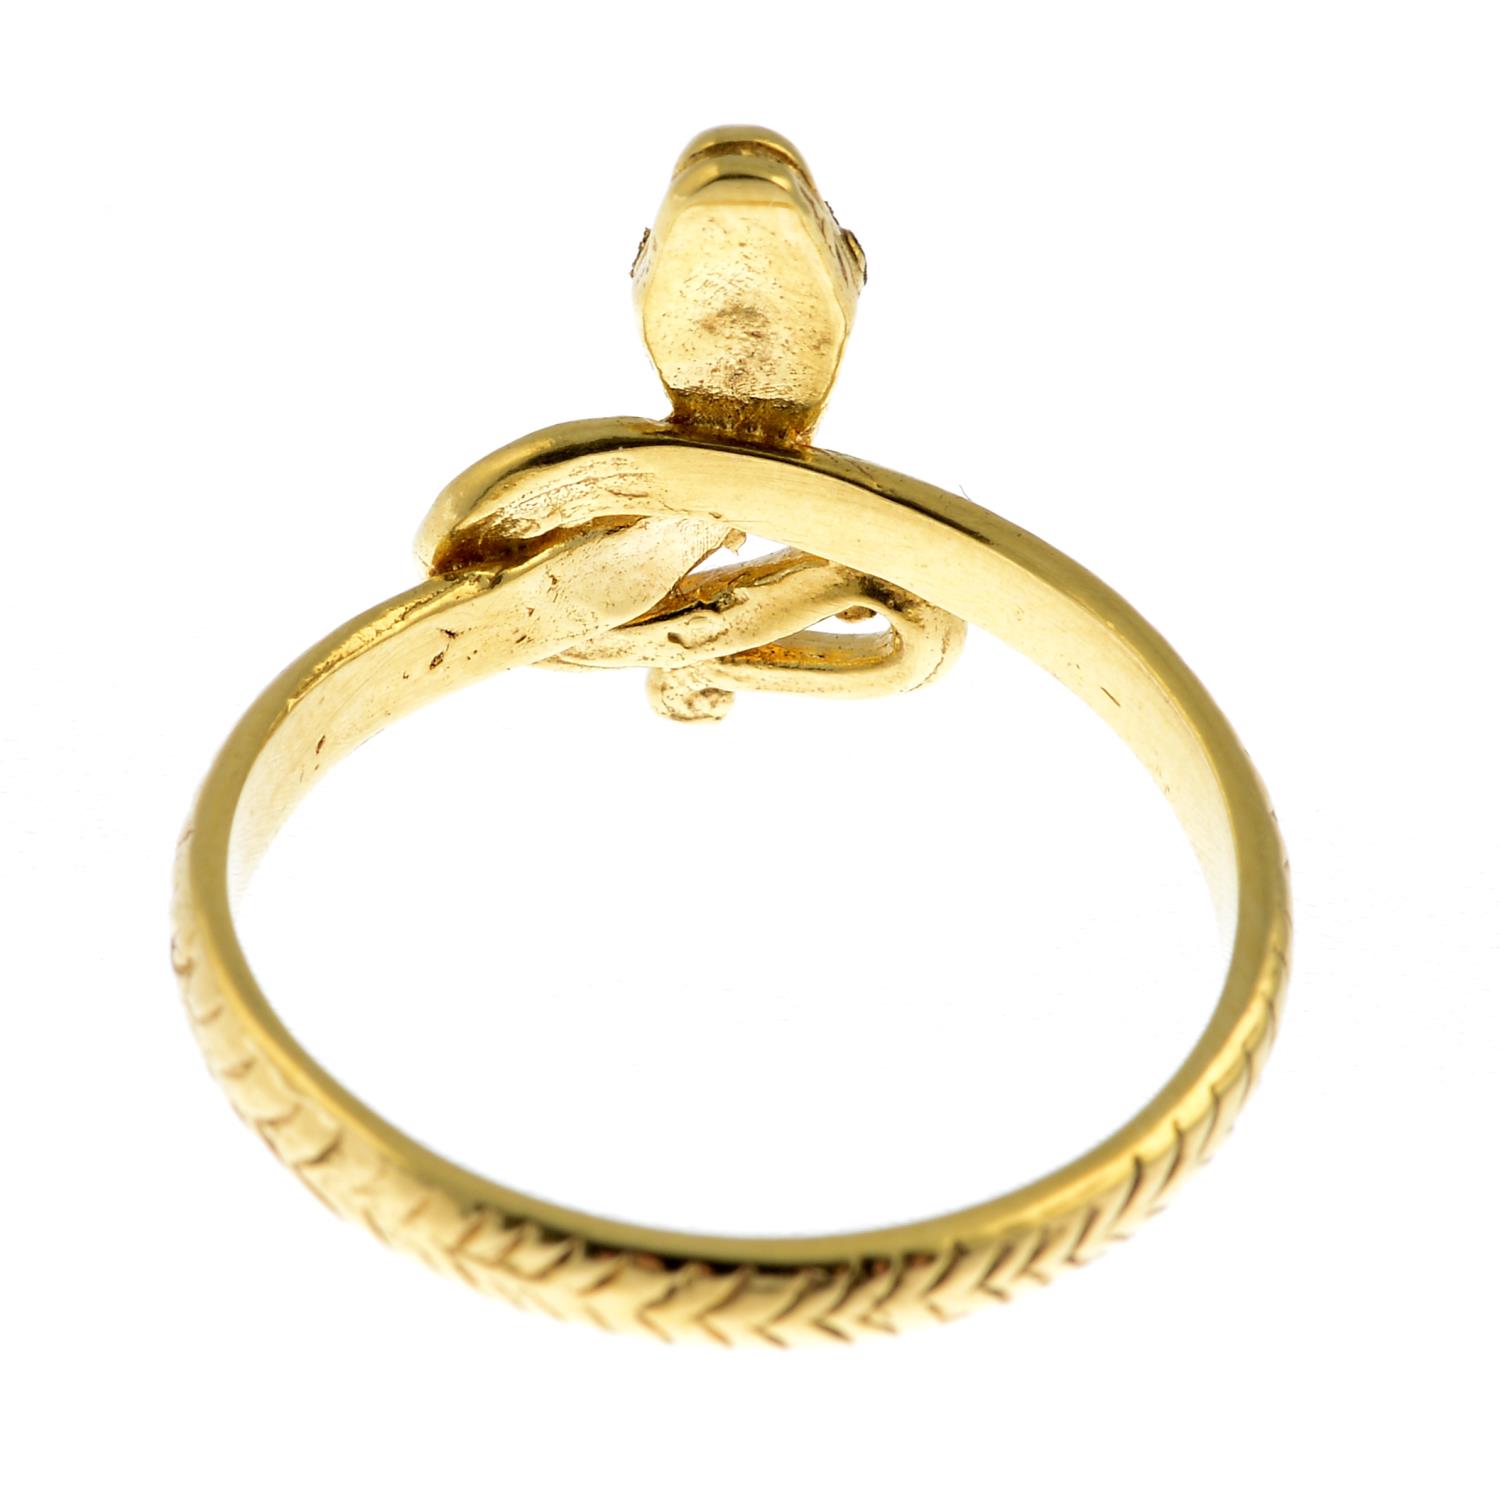 An 18ct gold snake ring, with ruby eyes detail.Hallmarks for 18ct gold. - Image 2 of 3